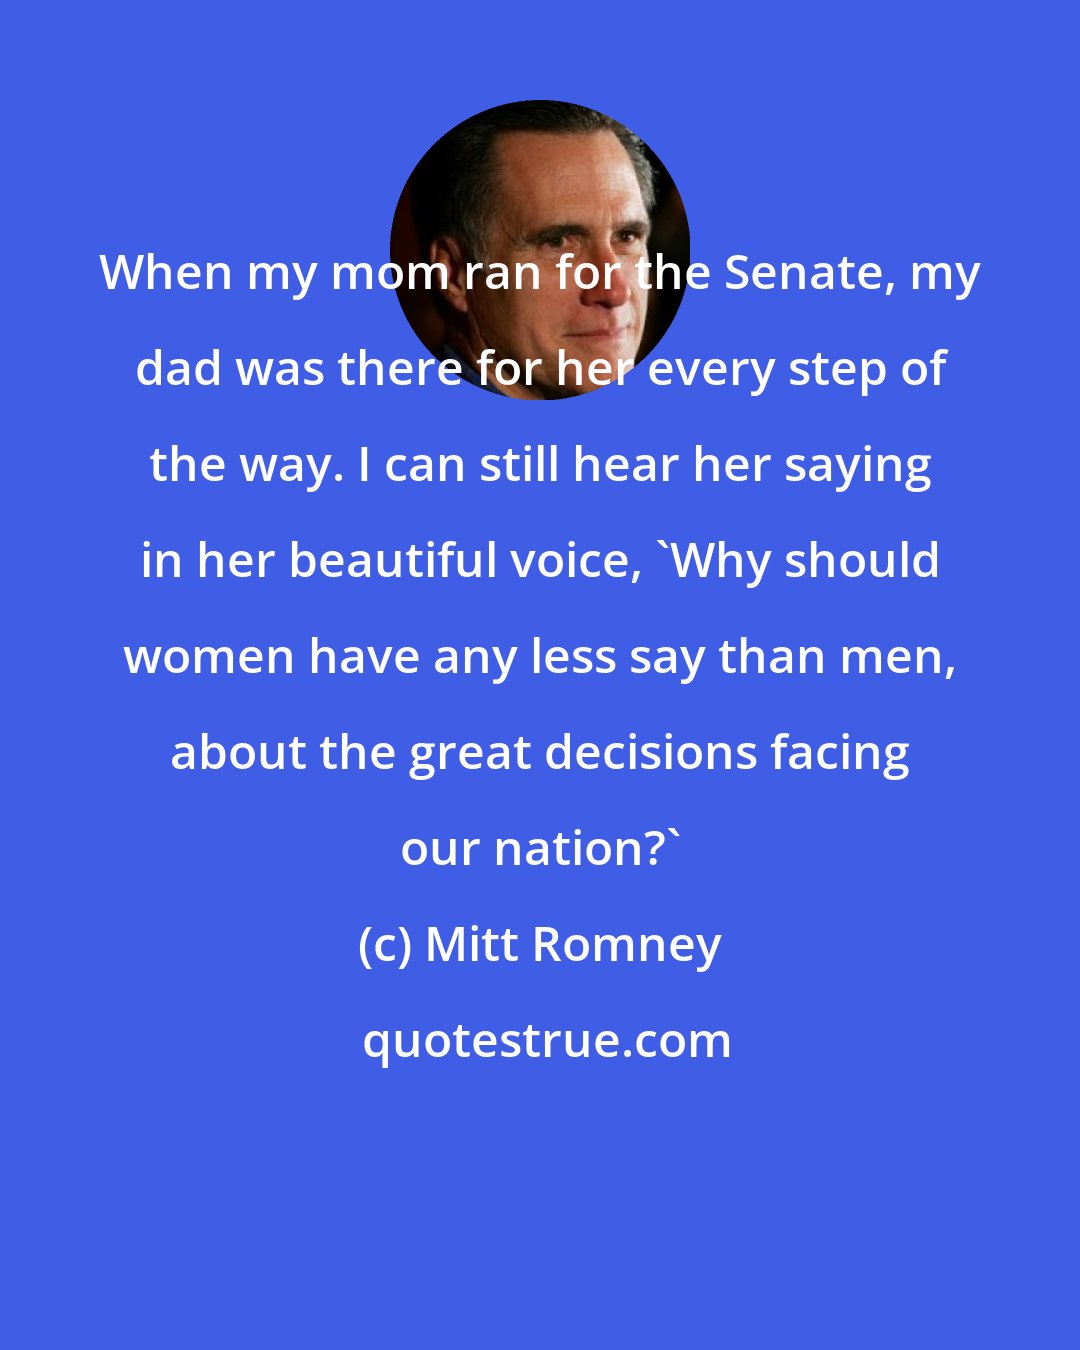 Mitt Romney: When my mom ran for the Senate, my dad was there for her every step of the way. I can still hear her saying in her beautiful voice, 'Why should women have any less say than men, about the great decisions facing our nation?'